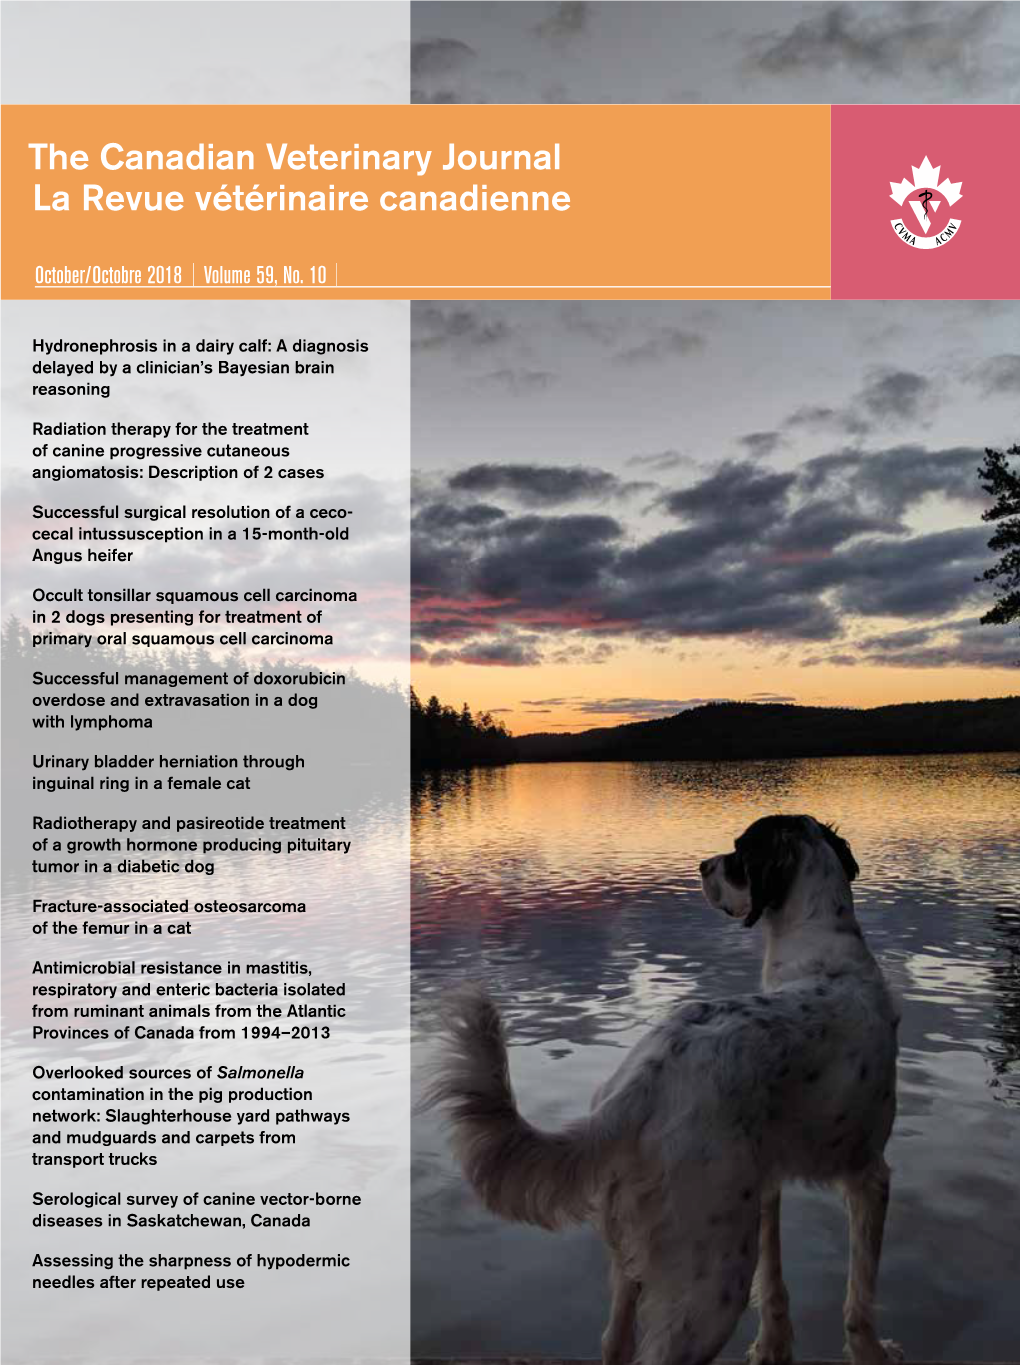 The Canadian Veterinary Journal La Revue Vétérinaire Canadienne Hydronephrosis in a Dairy Calf: a Diagnosis Delayed by a Clinician’S Bayesian Brain Reasoning